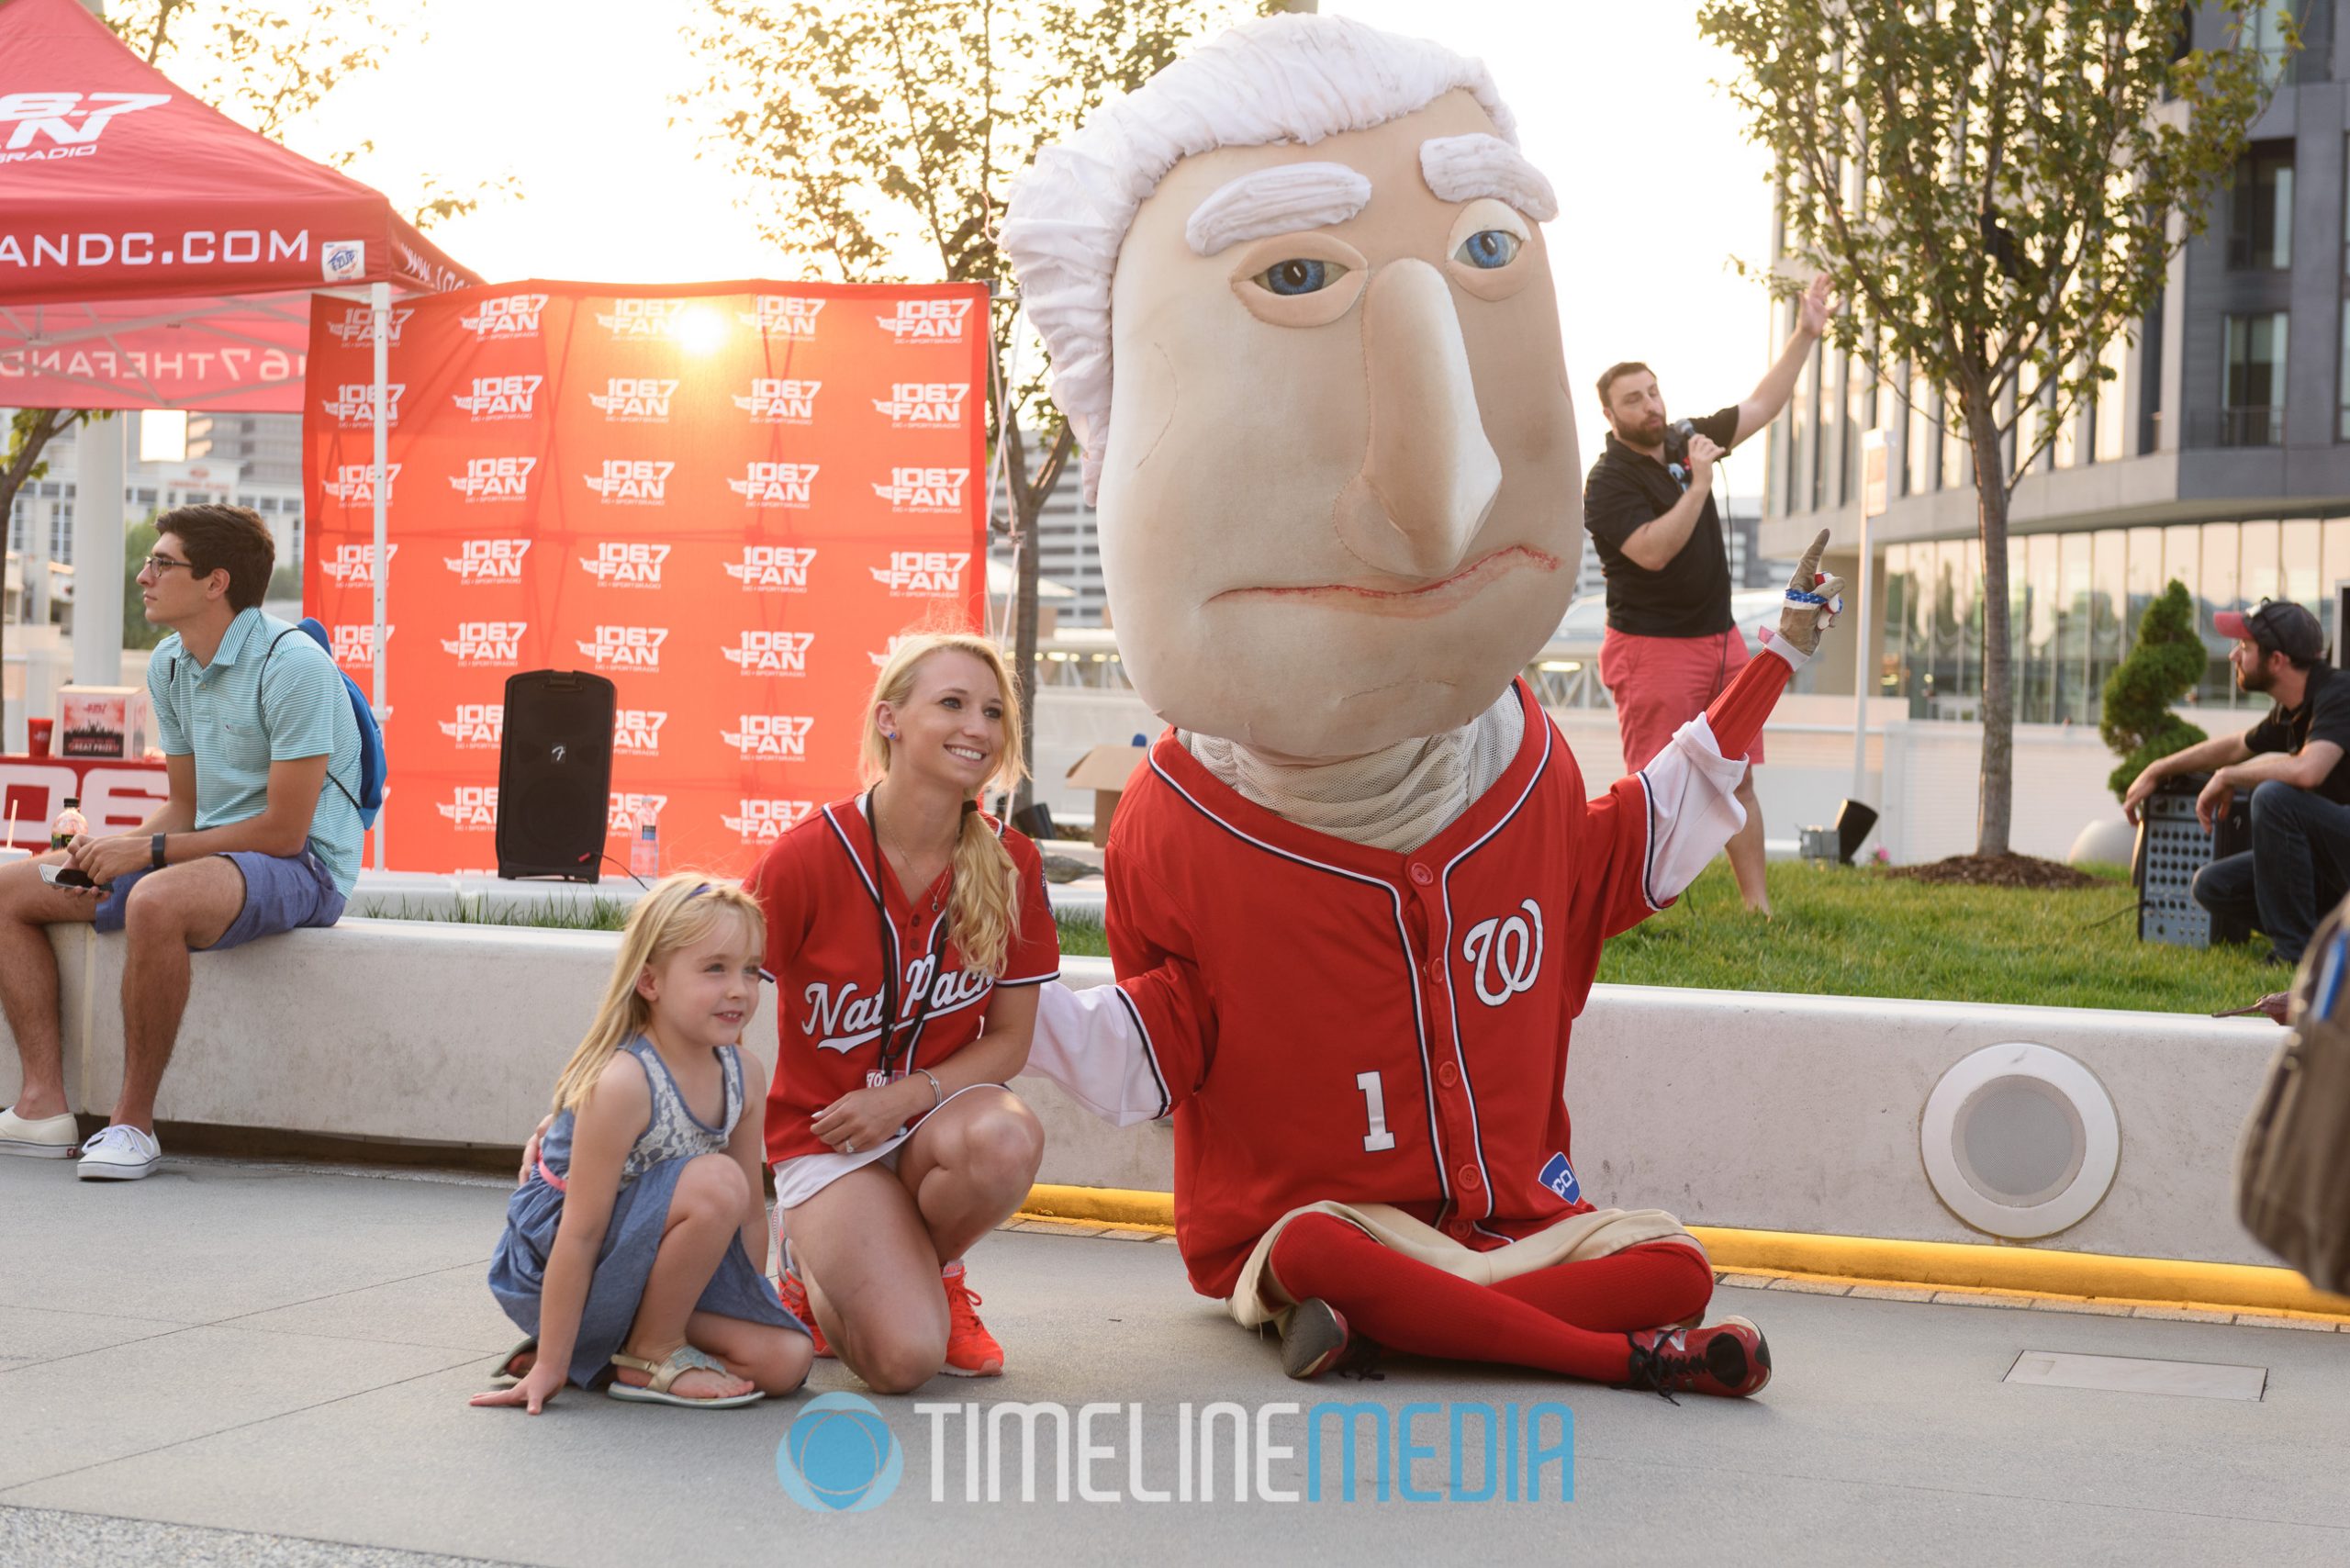 MLB All Star Game event on Tysons Corner Center Plaza with the Washington Nationals and the 1067 The Fan radio station